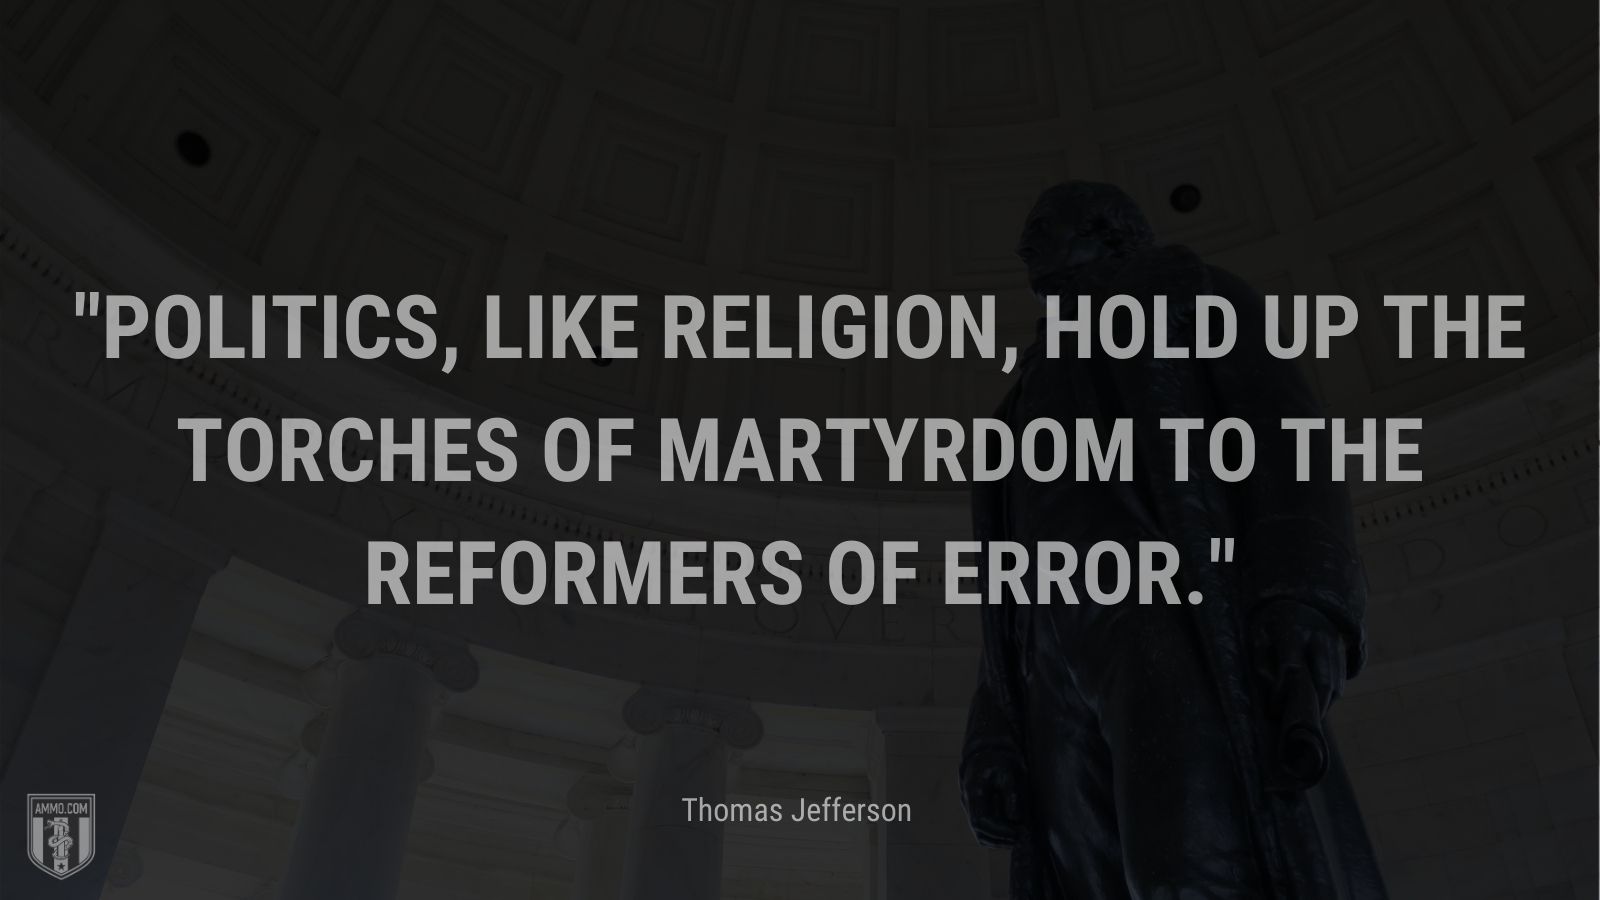 “Politics, like religion, hold up the torches of martyrdom to the reformers of error.” - Thomas Jefferson